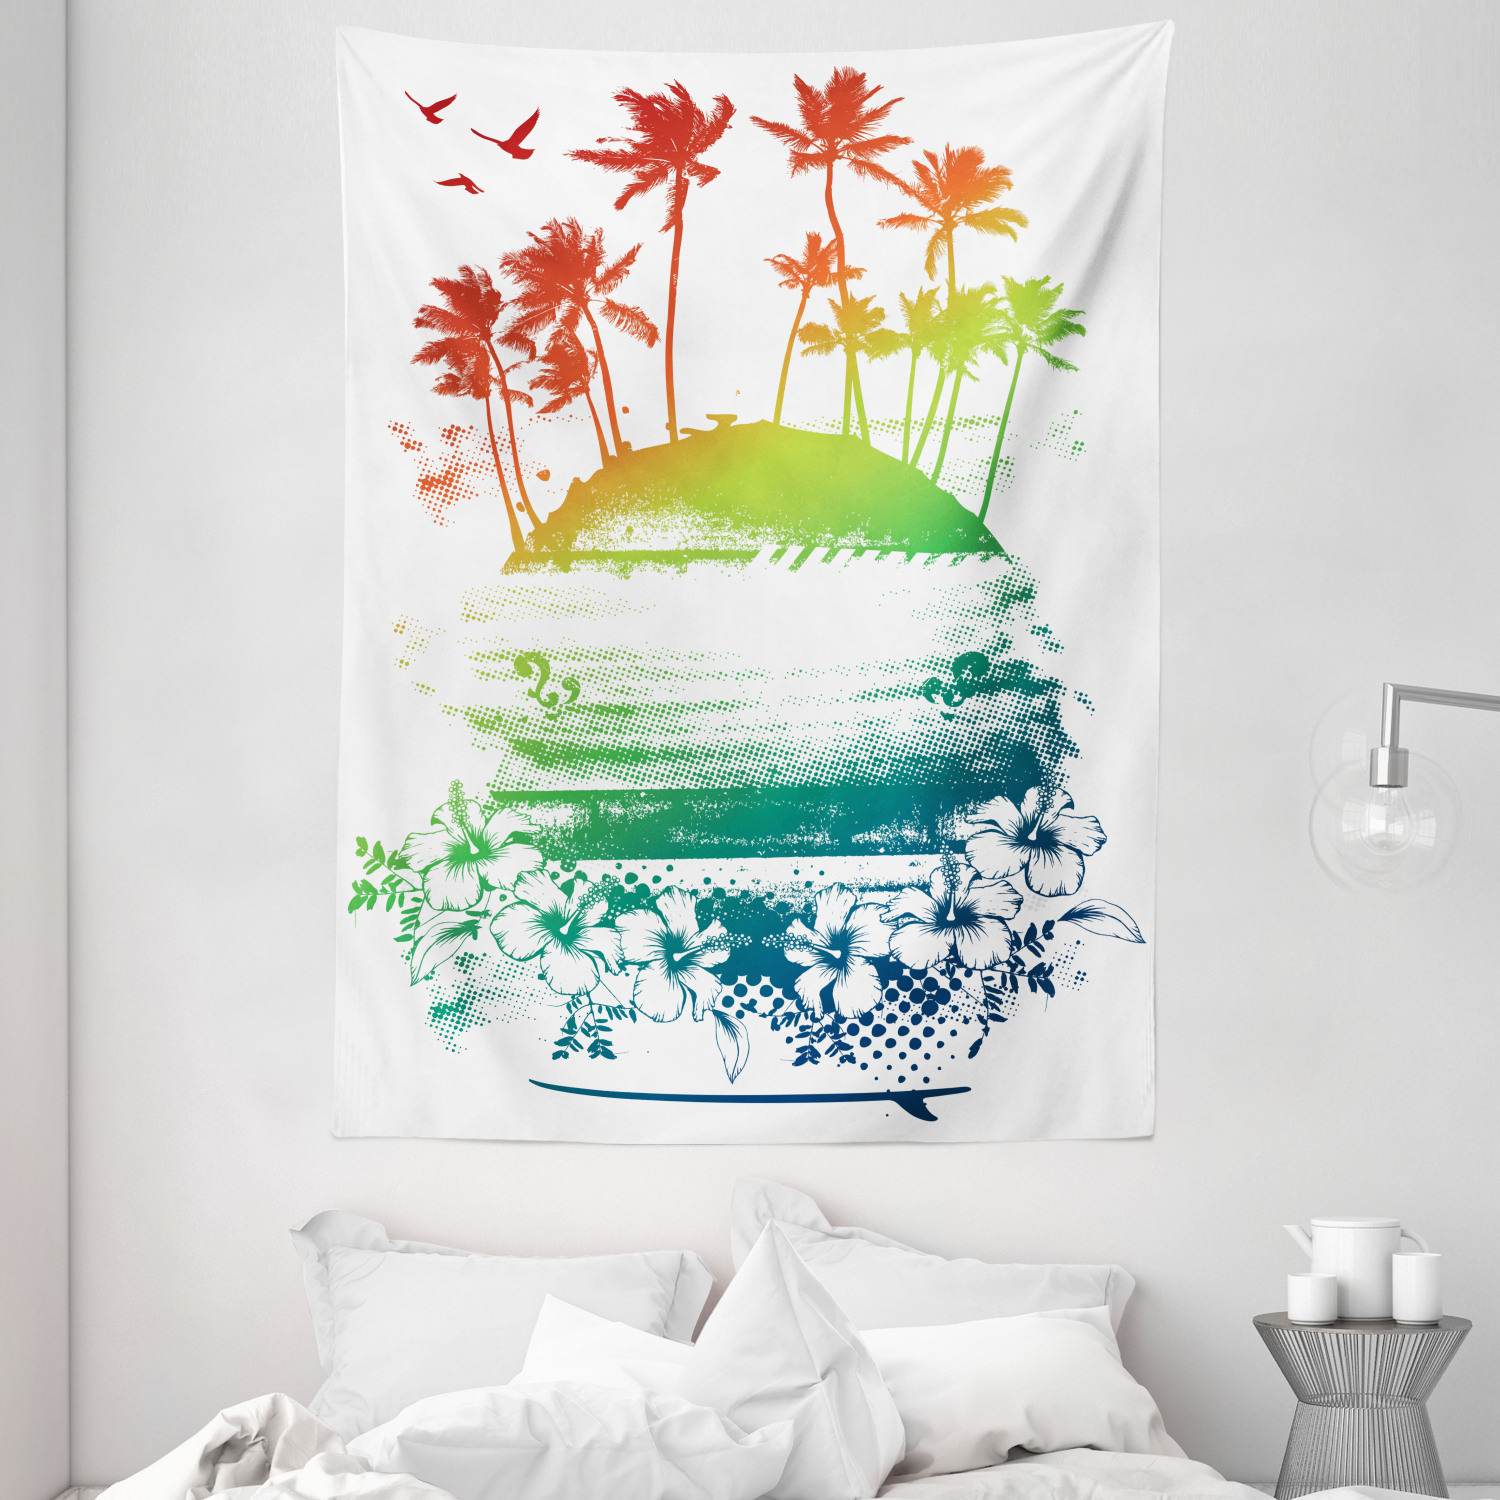 Colorful Tapestry Grunge Summer Scenery Print Wall Hanging Decor 